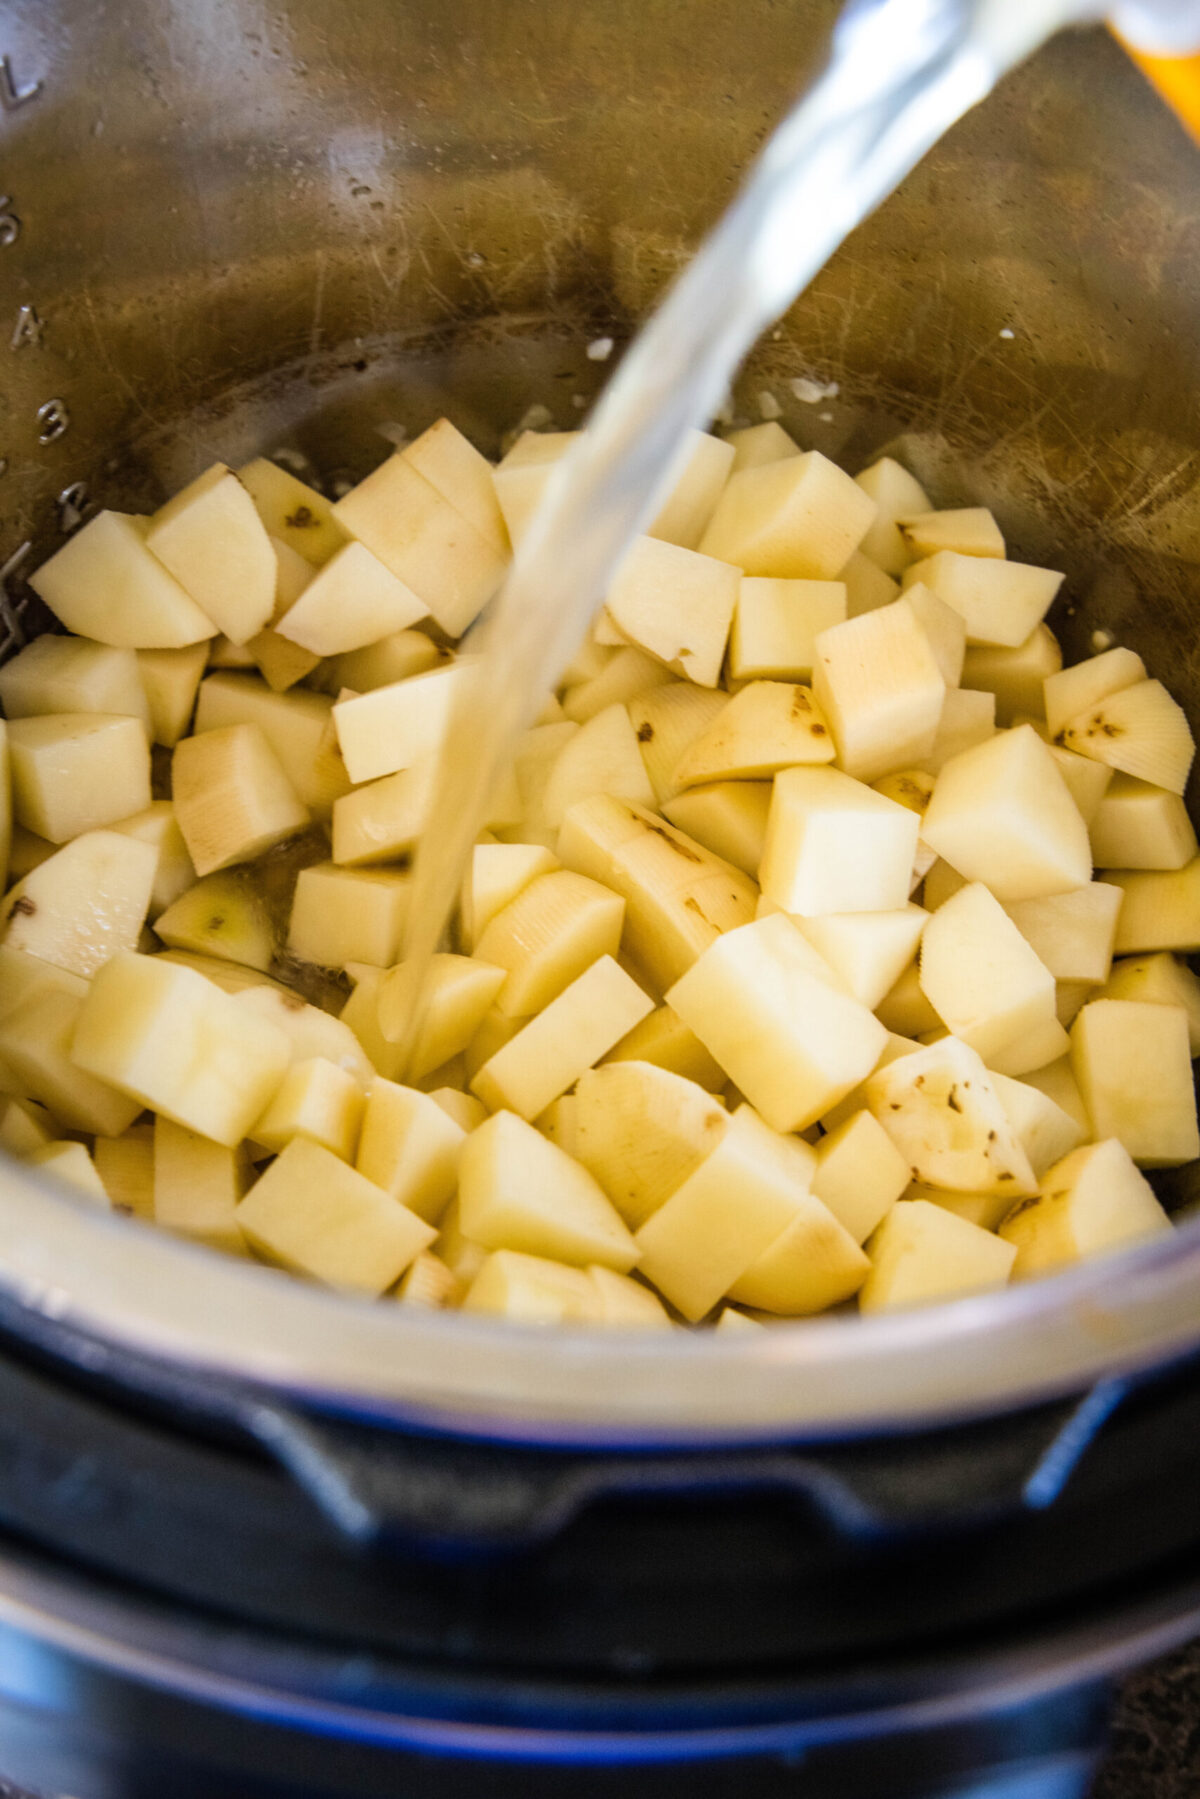 Chicken broth being poured over diced potatoes in a pot.